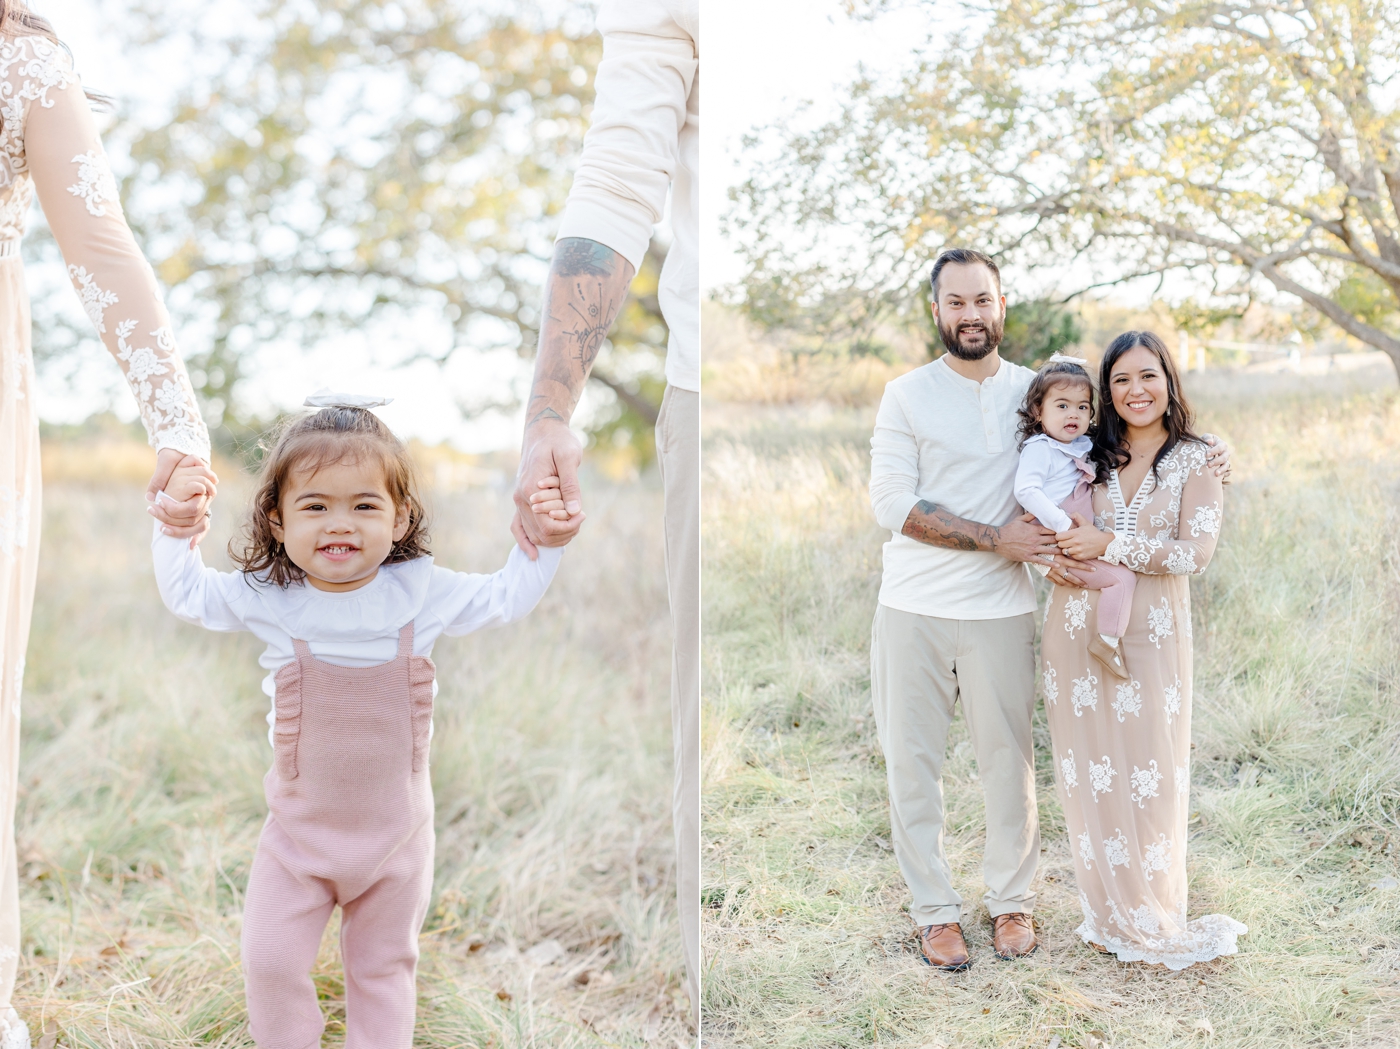 Smiling toddler with parents during park family session in Austin, TX park. Photos by Sana Ahmed Photography.